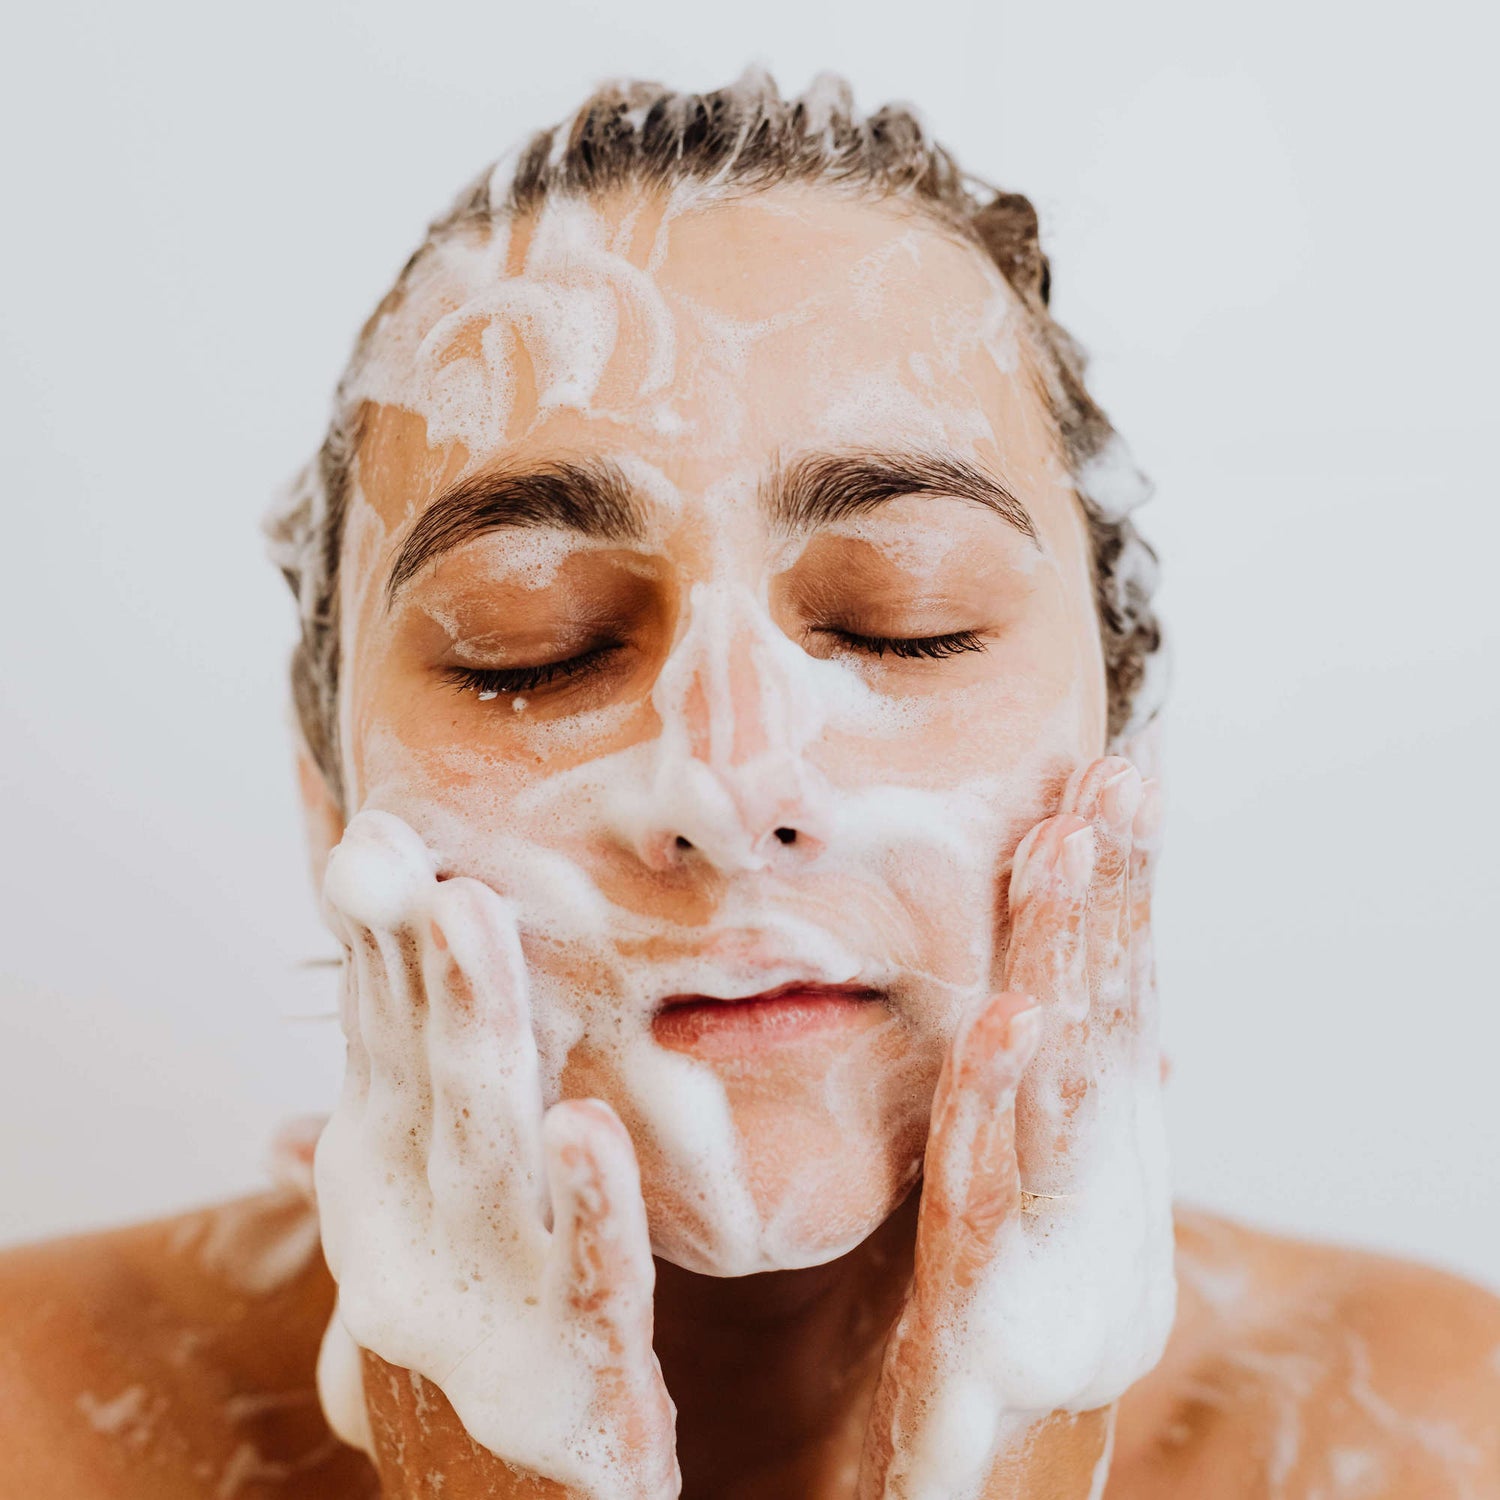 What Is Double Cleansing? Plus, 2 Other Ways to Keep Skin Spotless